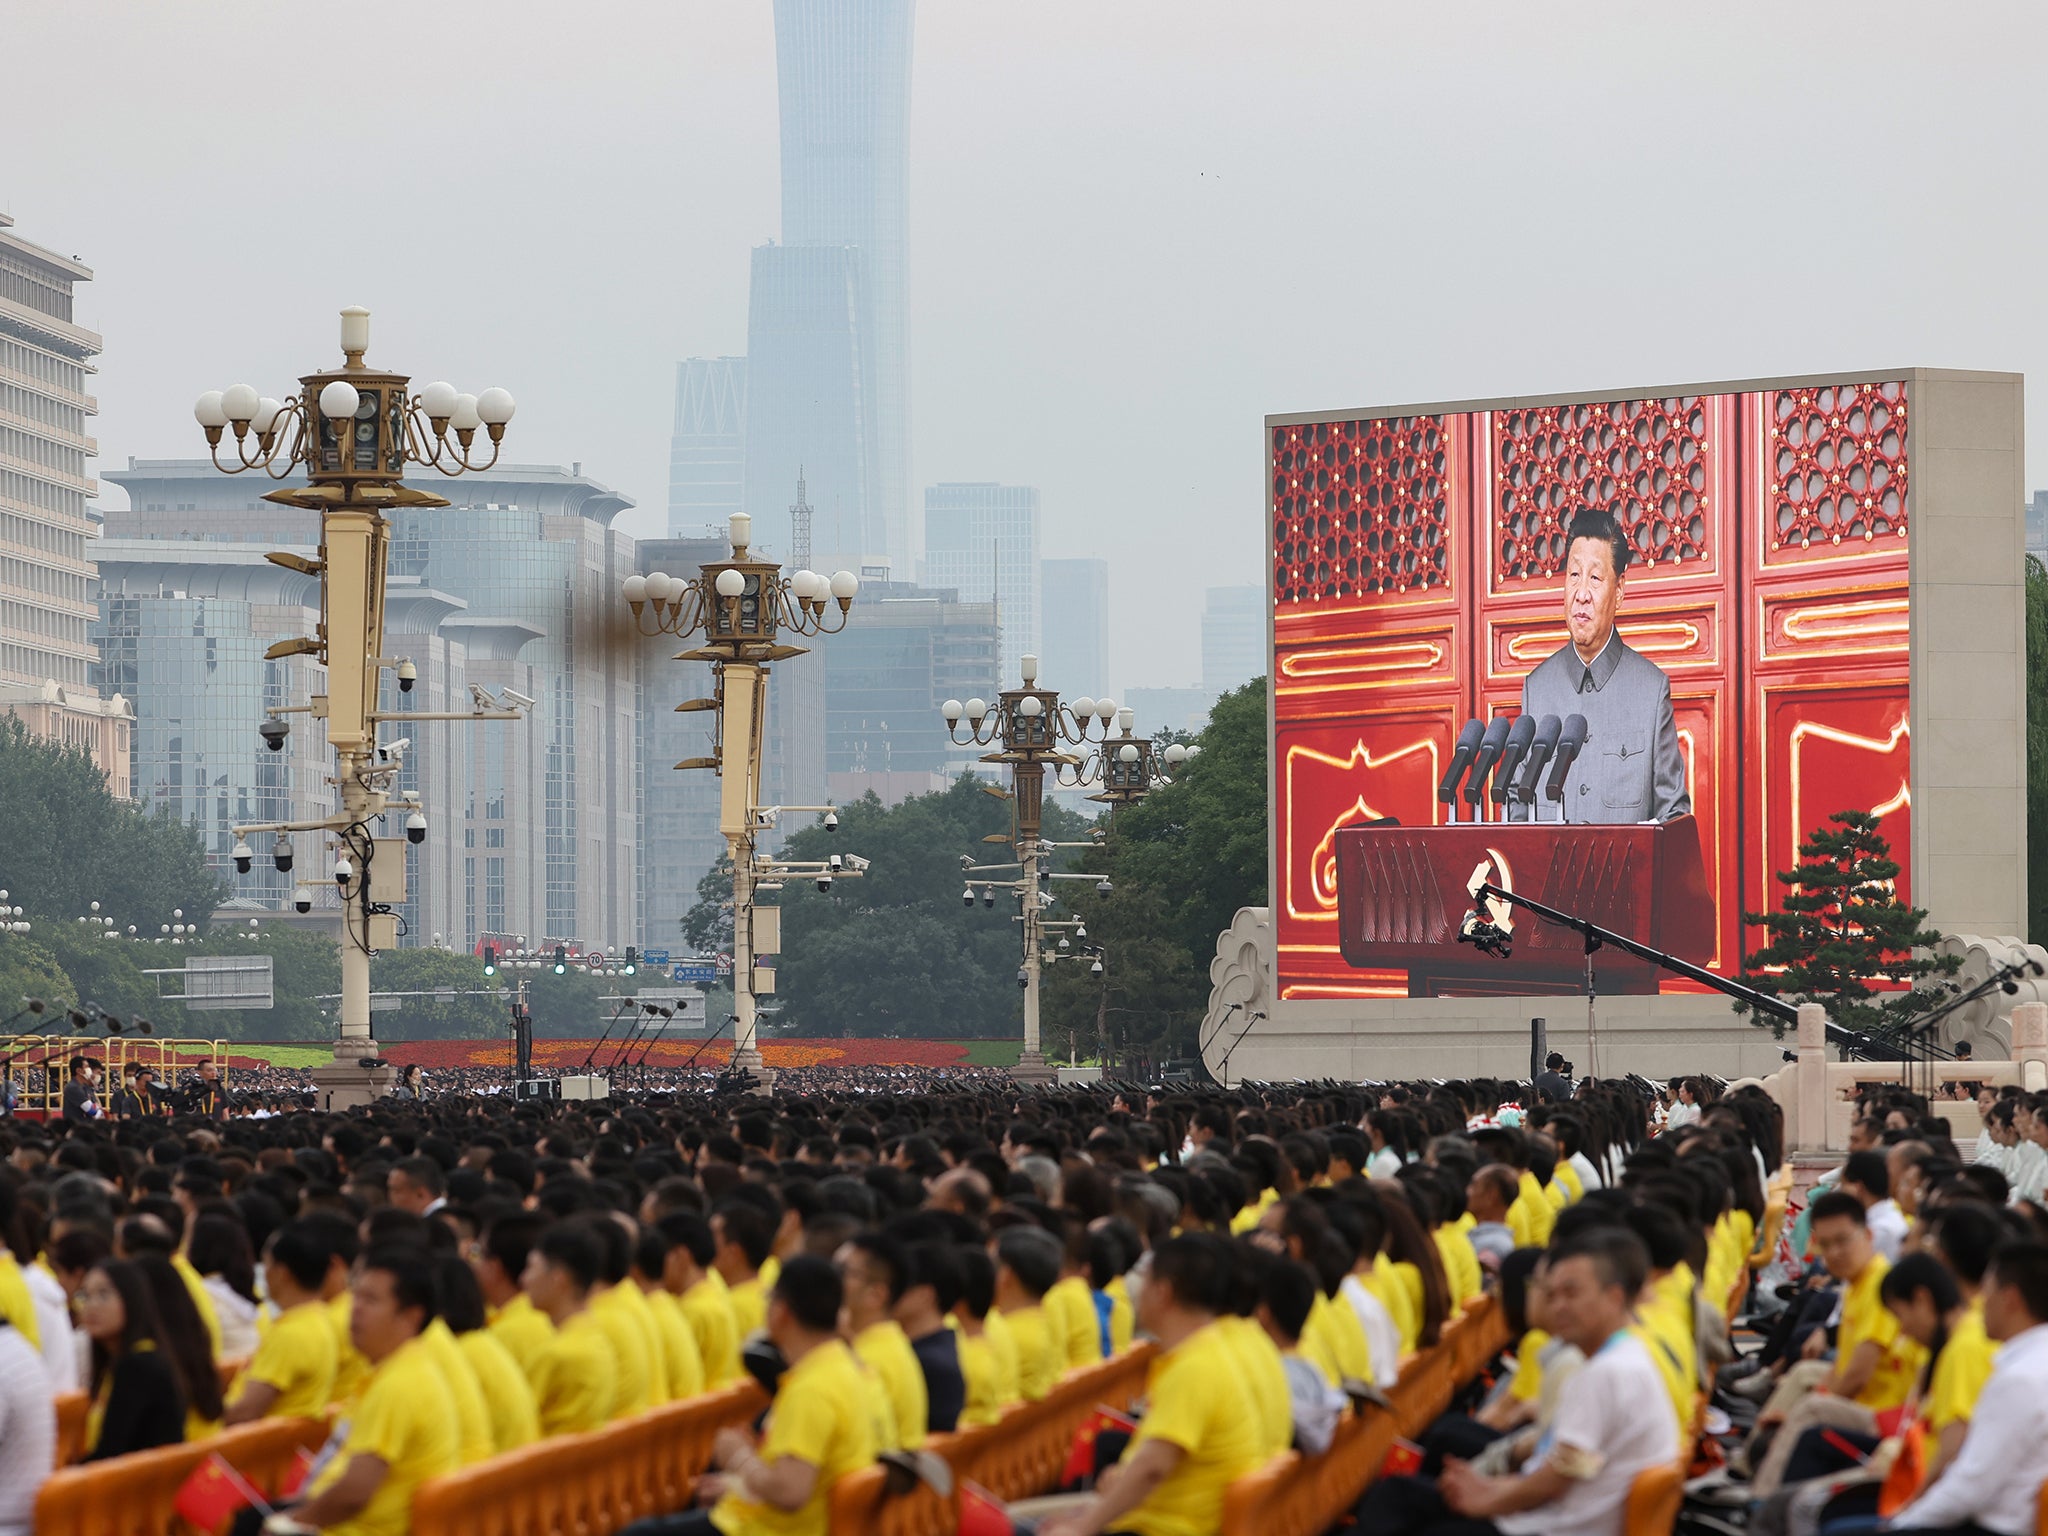 File: A large screen shows Chinese President Xi Jinping makes a speech during the celebration marking 100th anniversary of Chinese Communist Party at Tiananmen Square in Beijing.